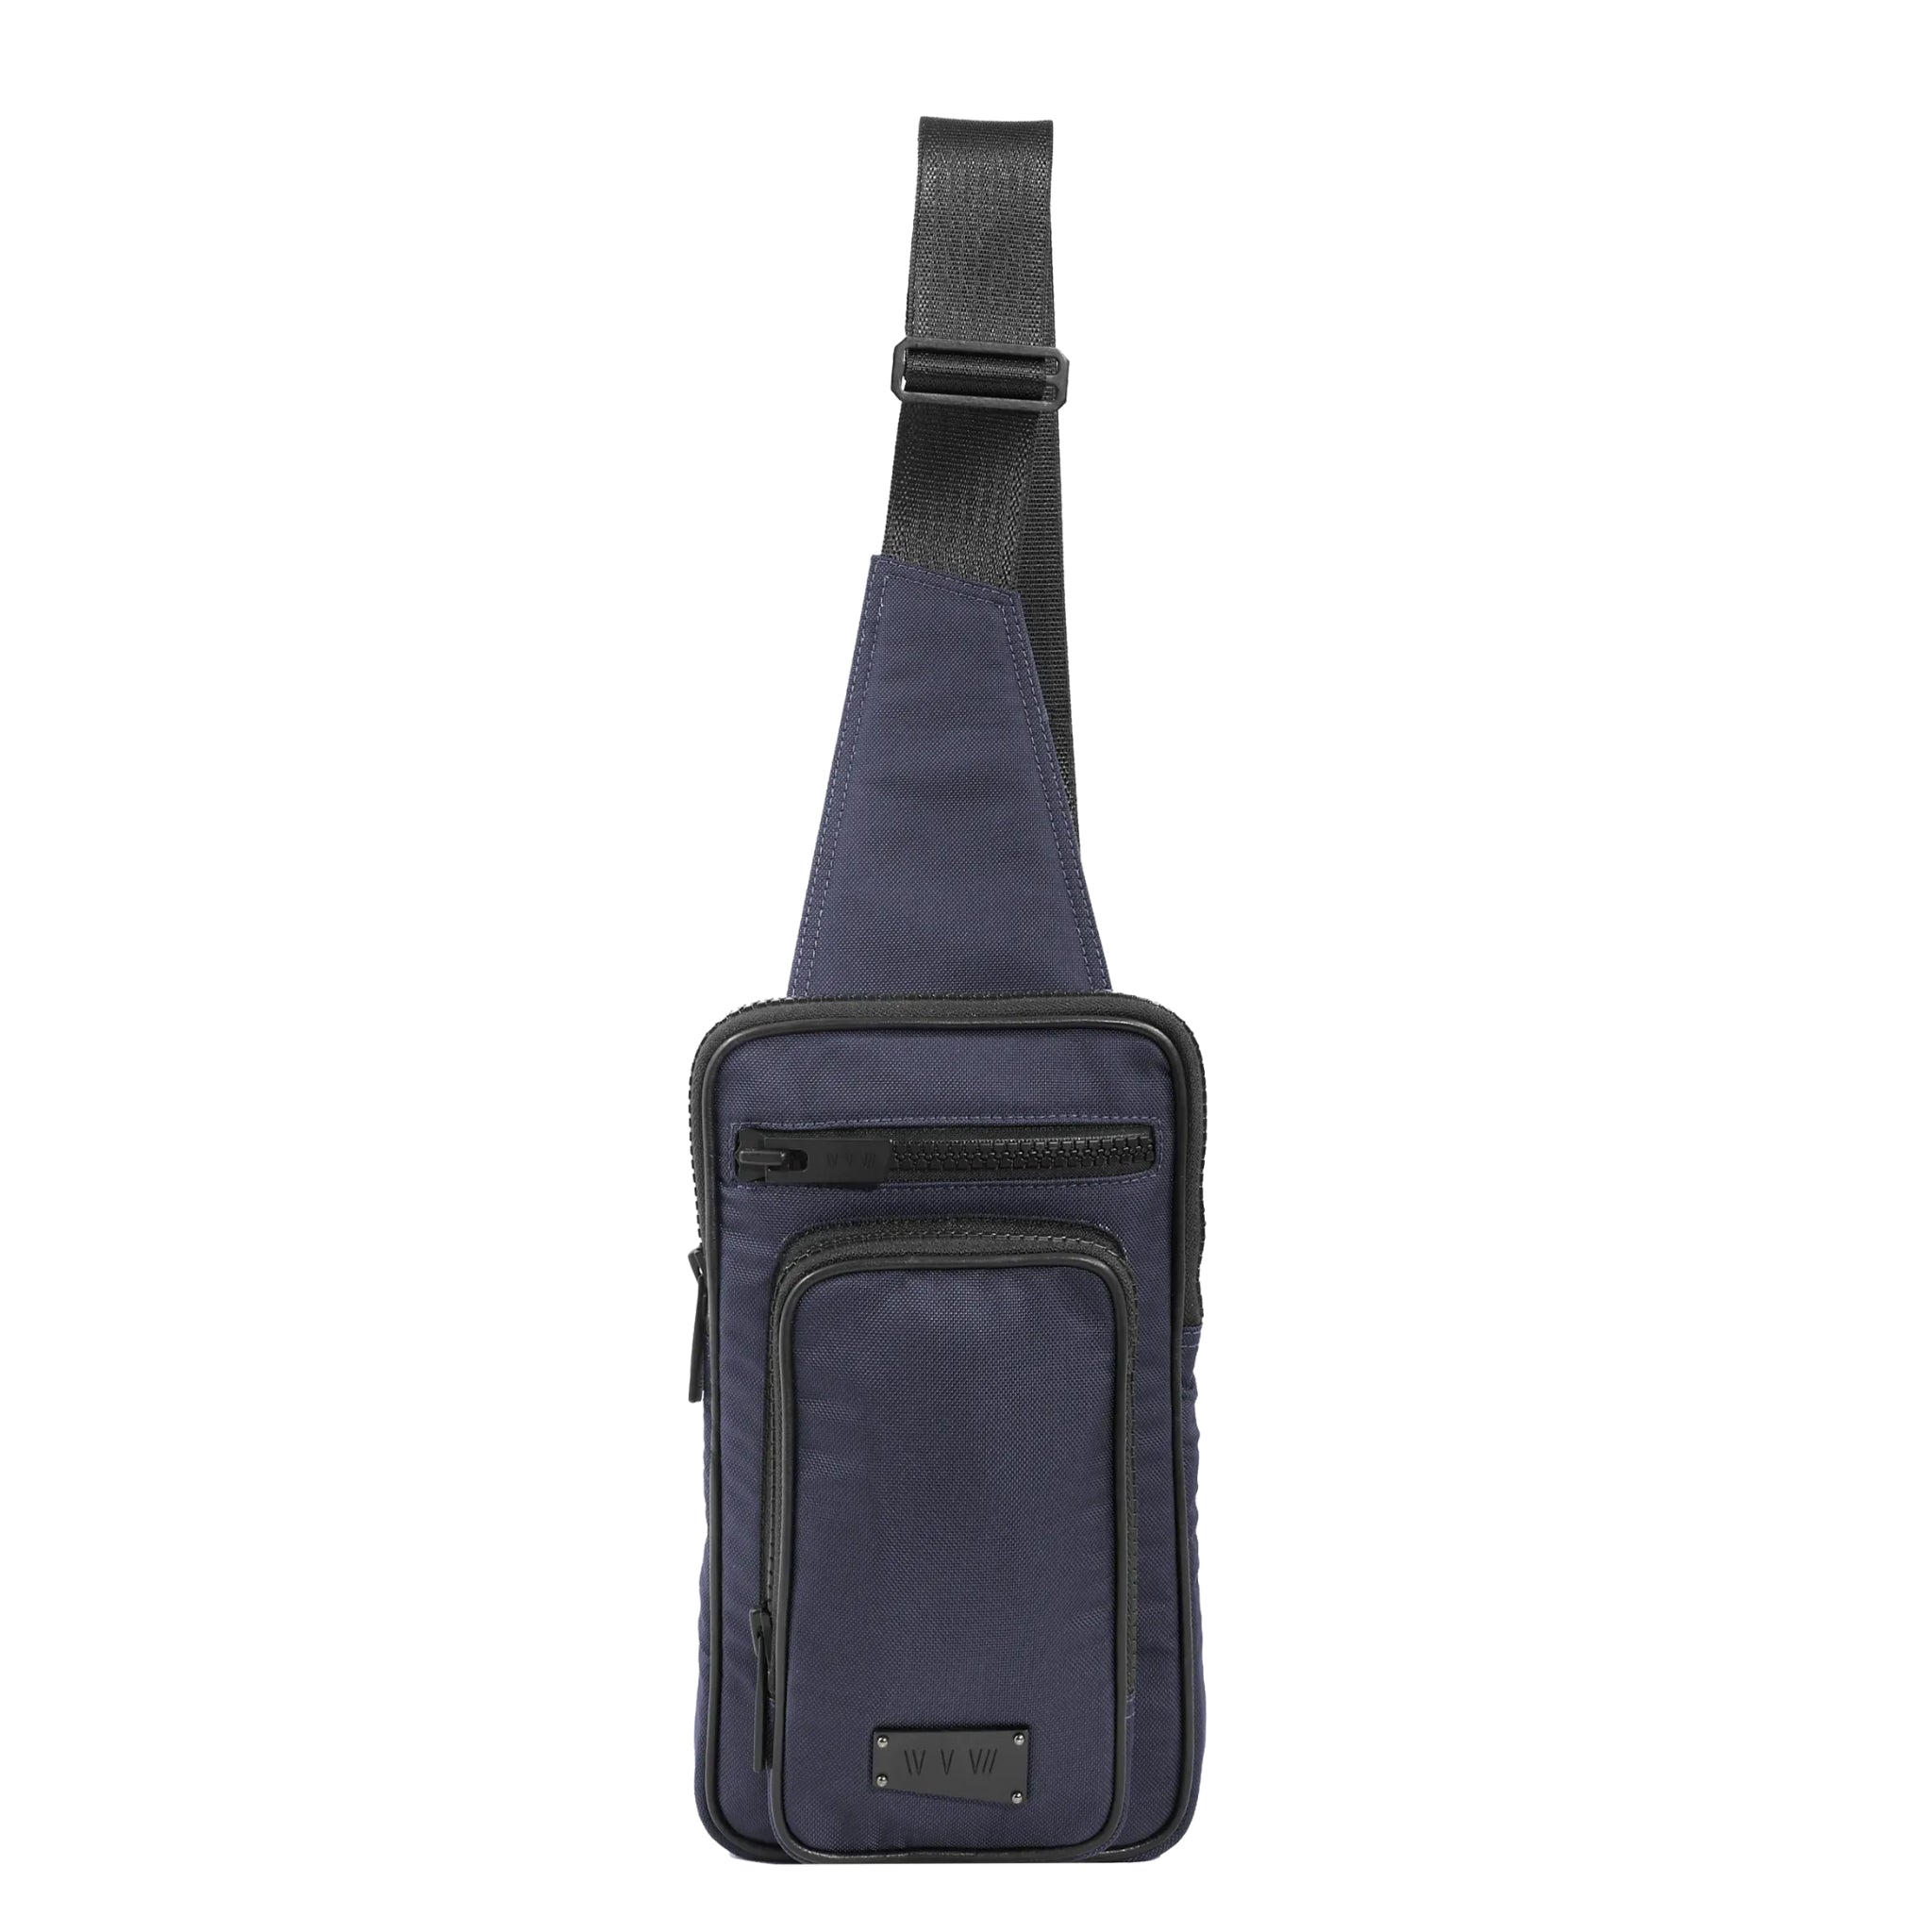 Face view of a utilitarian style sling in navy upcycled nylon material on a white background.